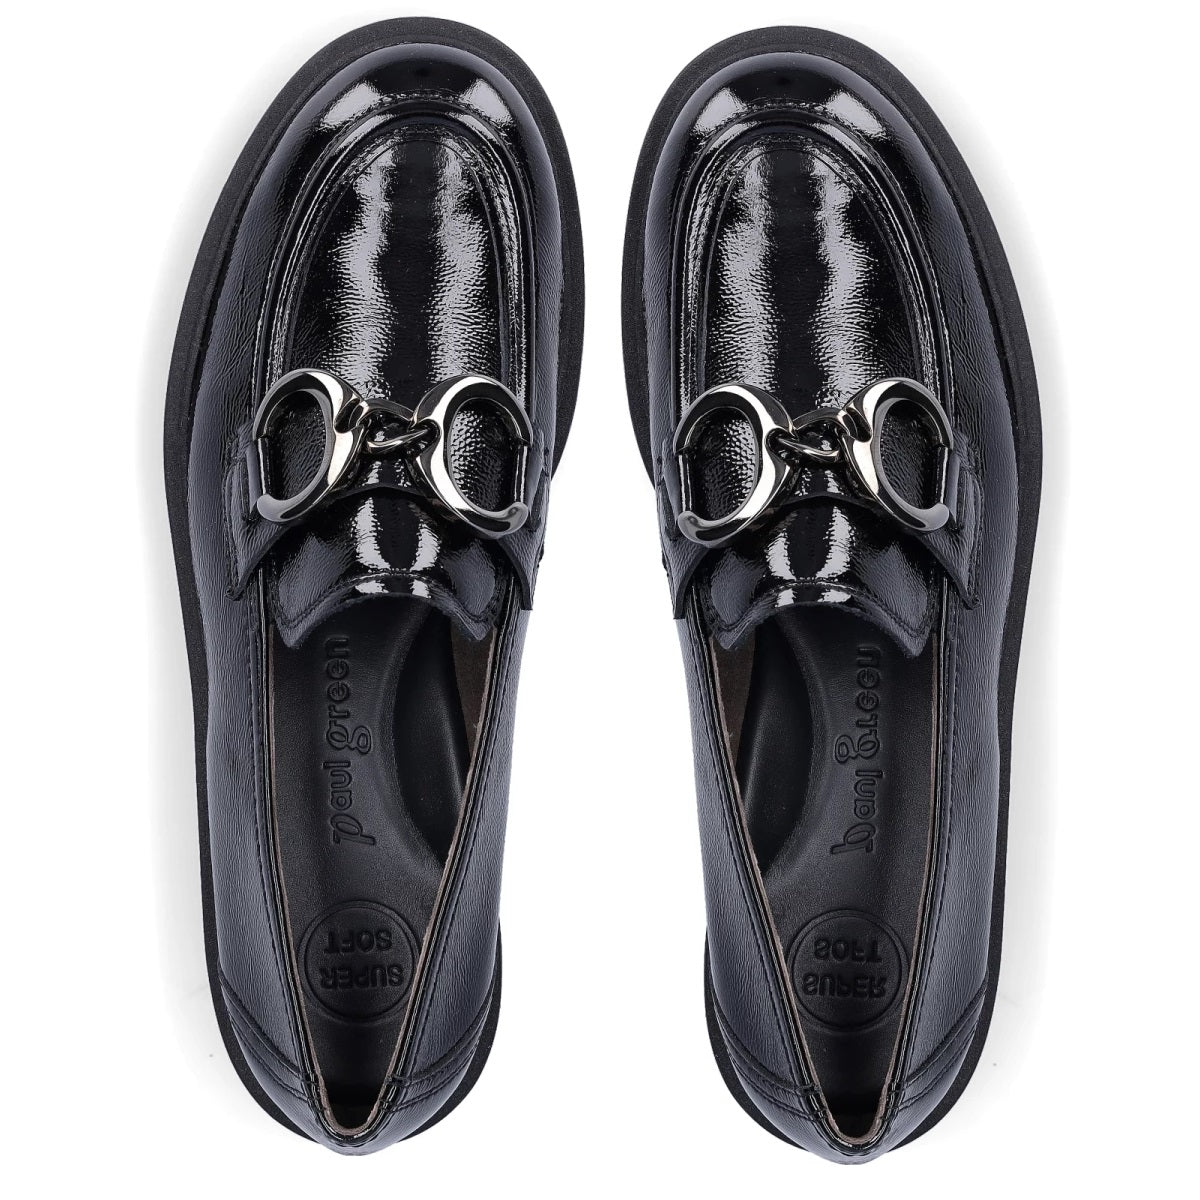 PAUL GREEN 1008 Chunky Loafer-BLACK PATENT